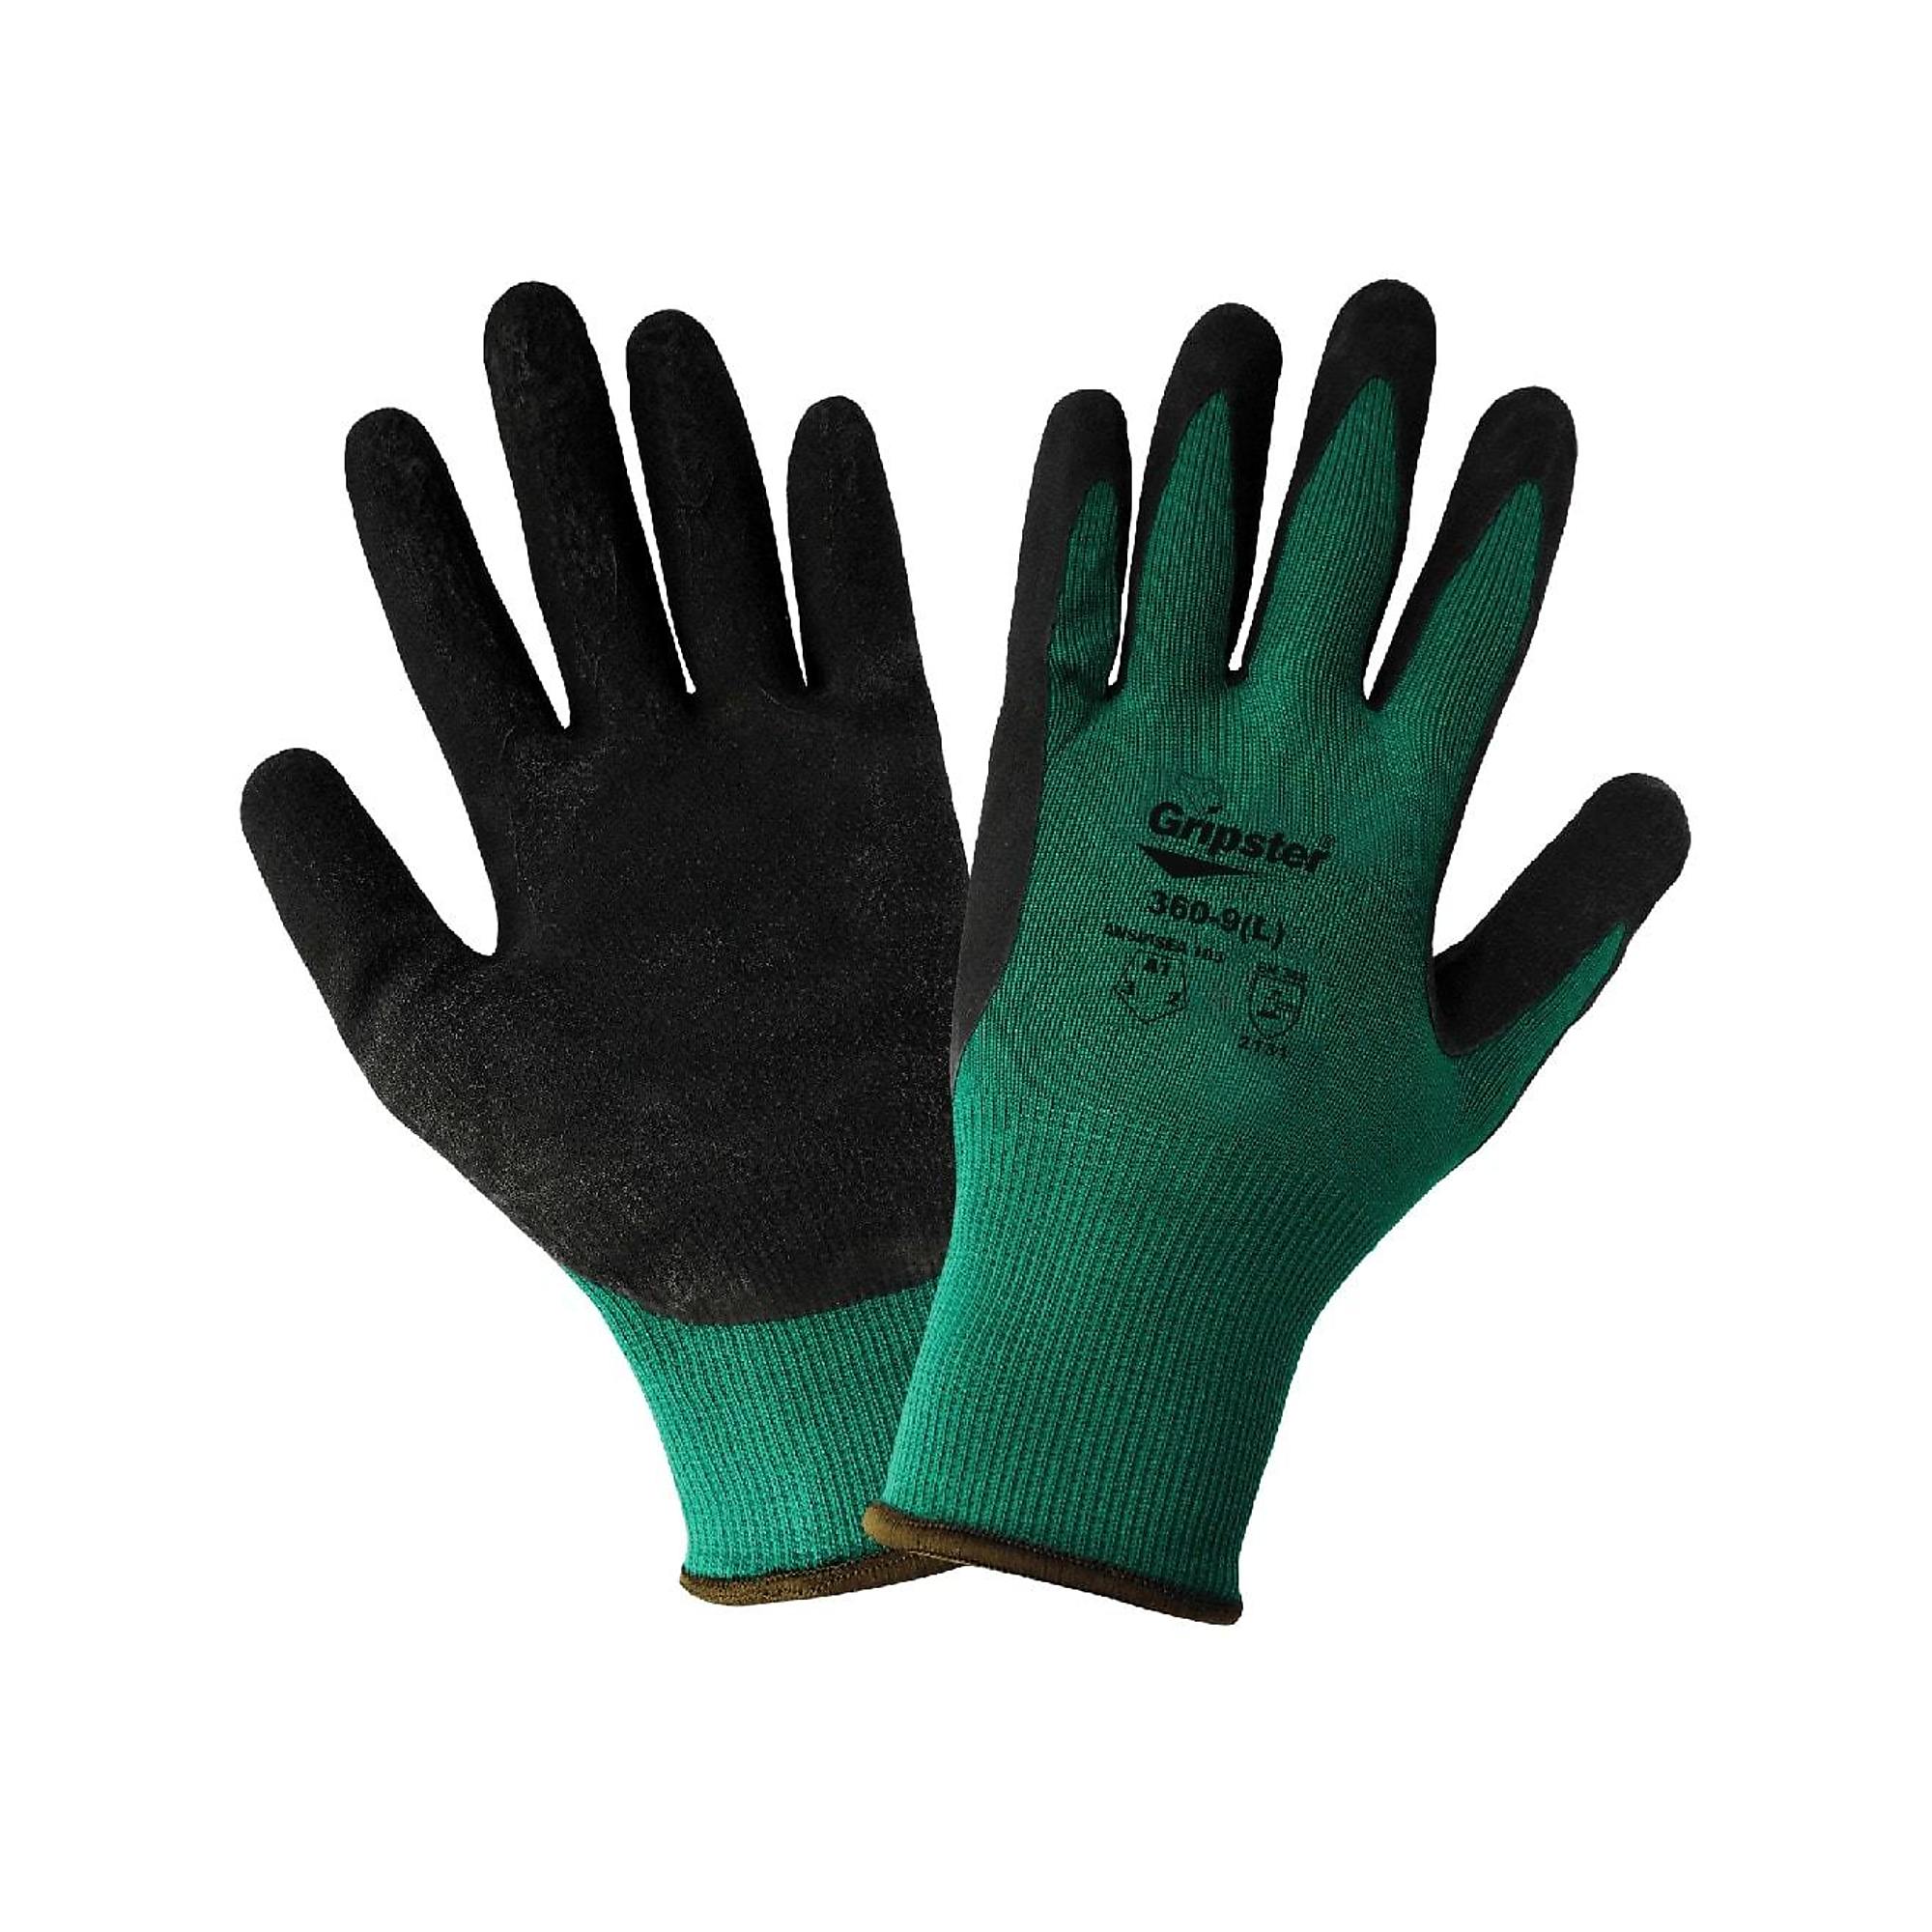 Global Glove Gripster , Green, Black Rub Coated, Cut Resistant A1 Gloves - 12 Pairs, Size M, Color Green/Black, Included (qty.) 12 Model 360-8(M)